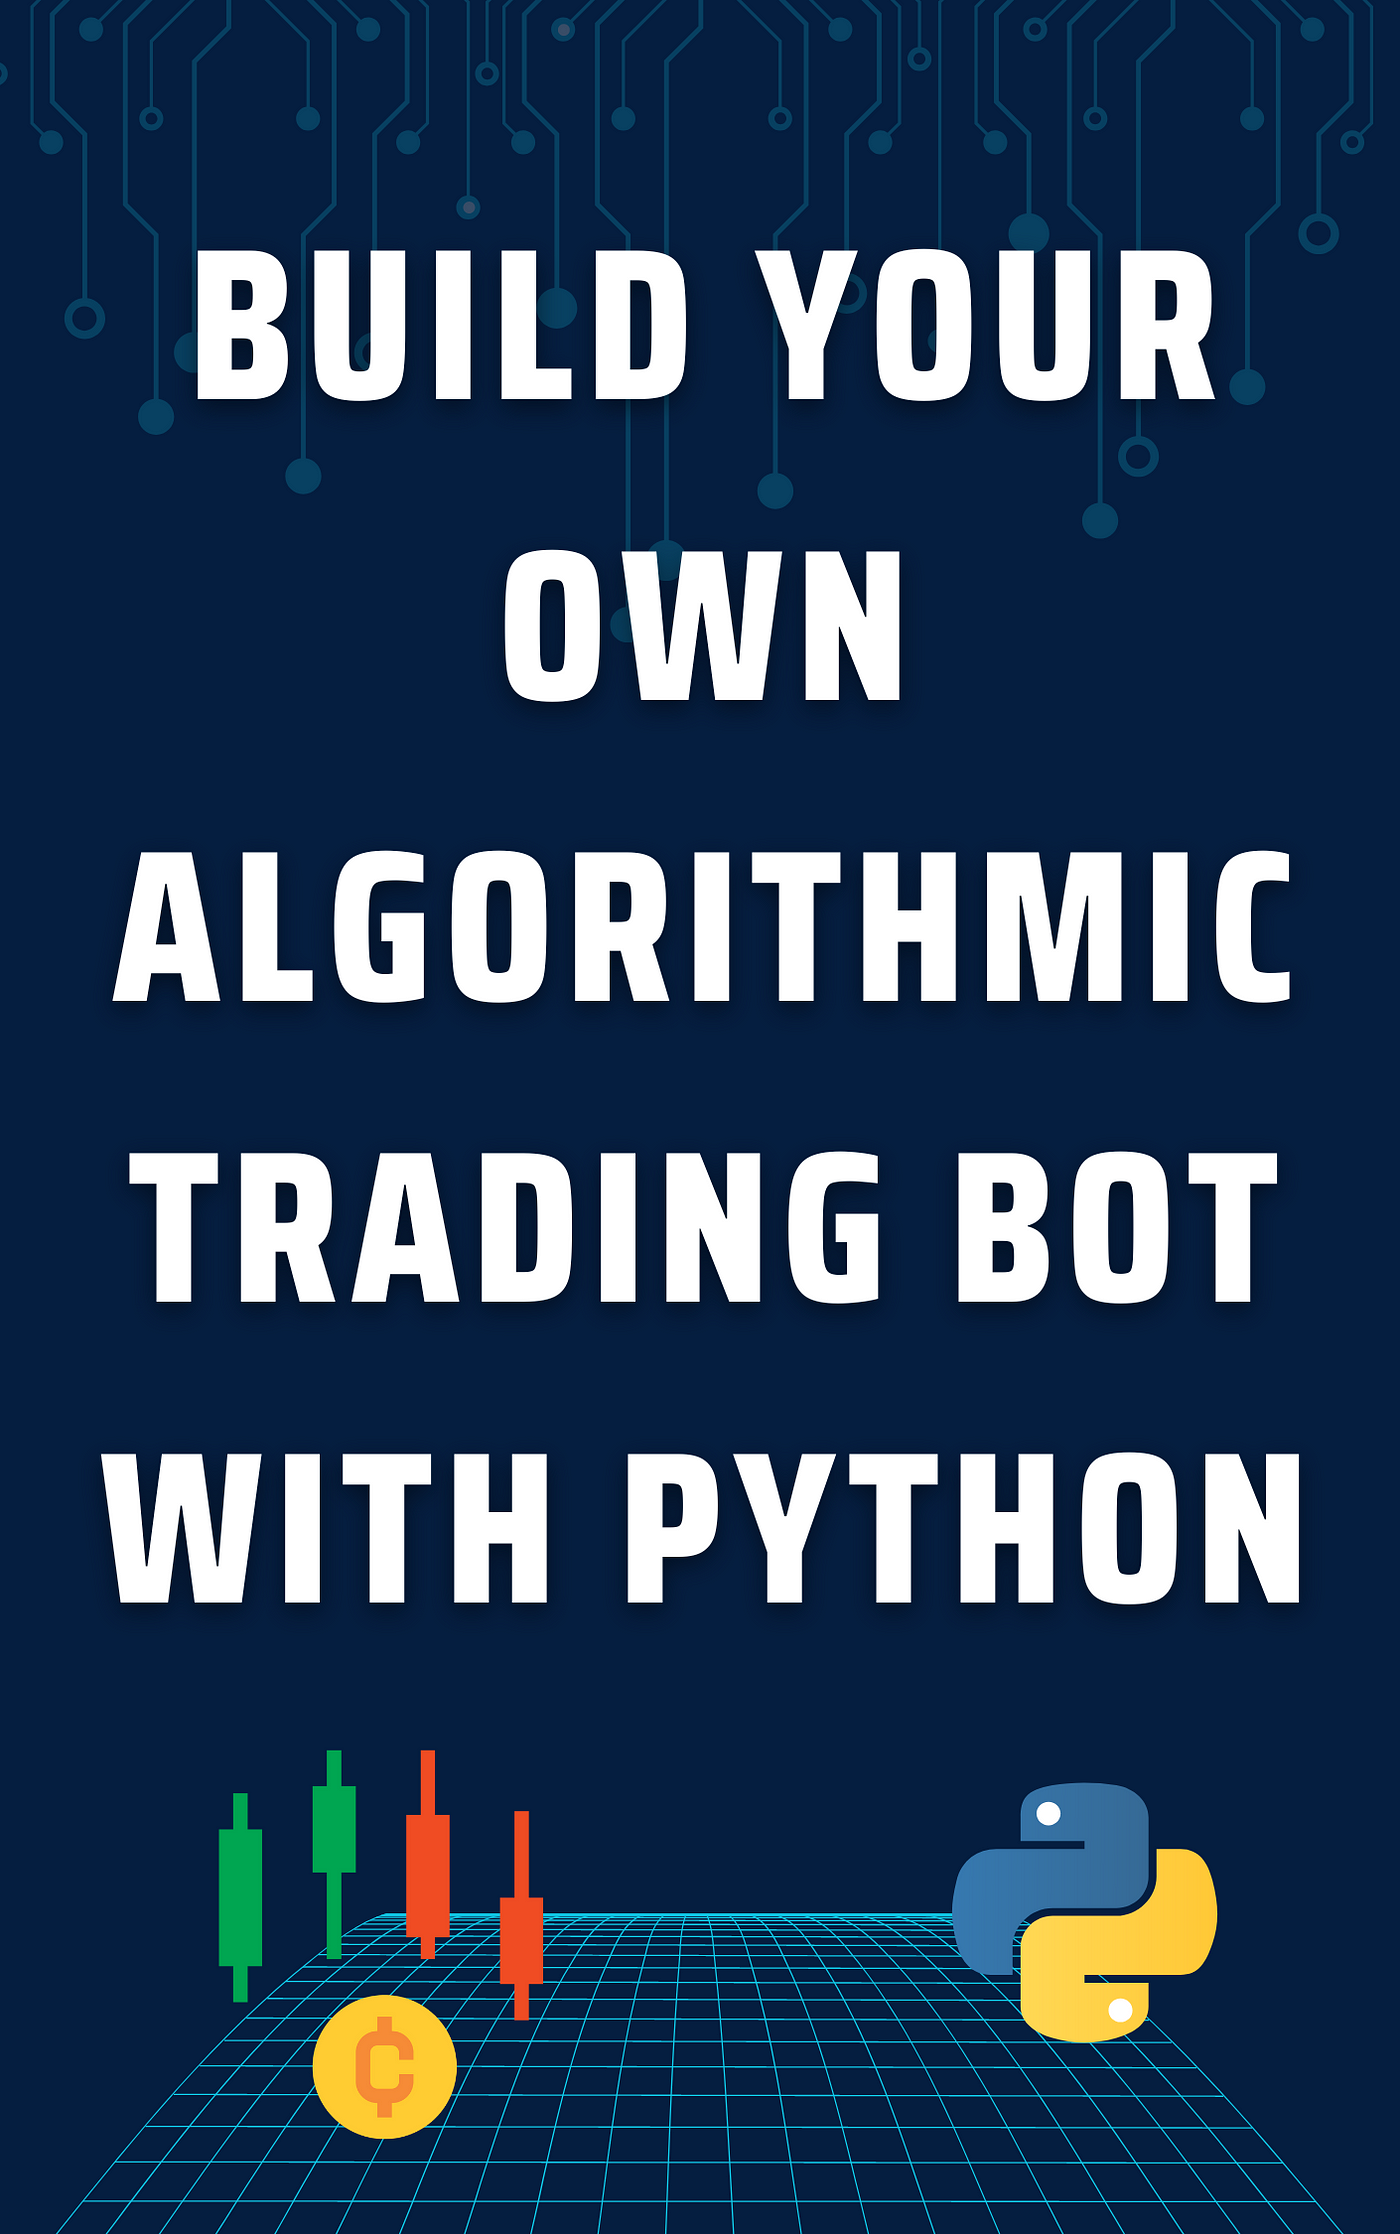 Build Your Own Algorithmic Trading Bot with Python Introduction | by James  Hinton | Medium